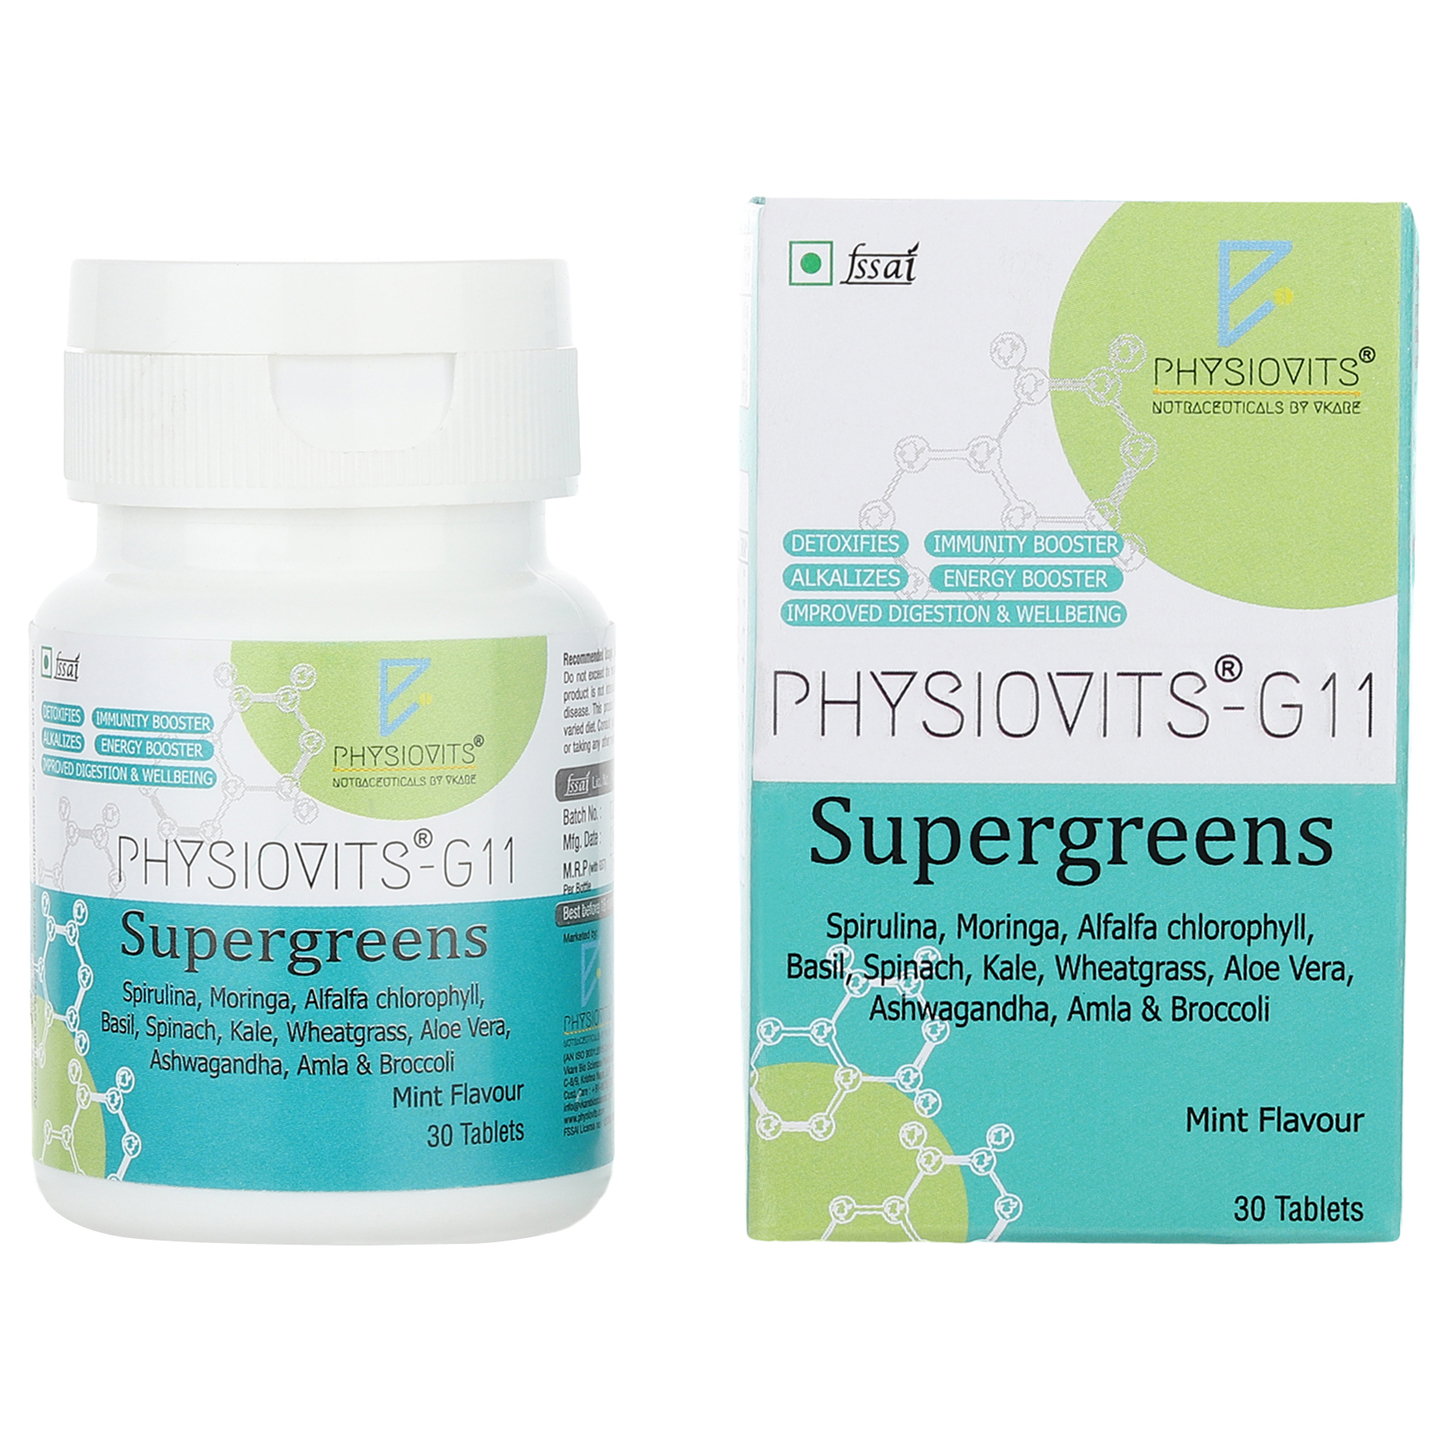 Physiovits G-11 Supergreens - Mint Flavour - Box of 30 Tablets